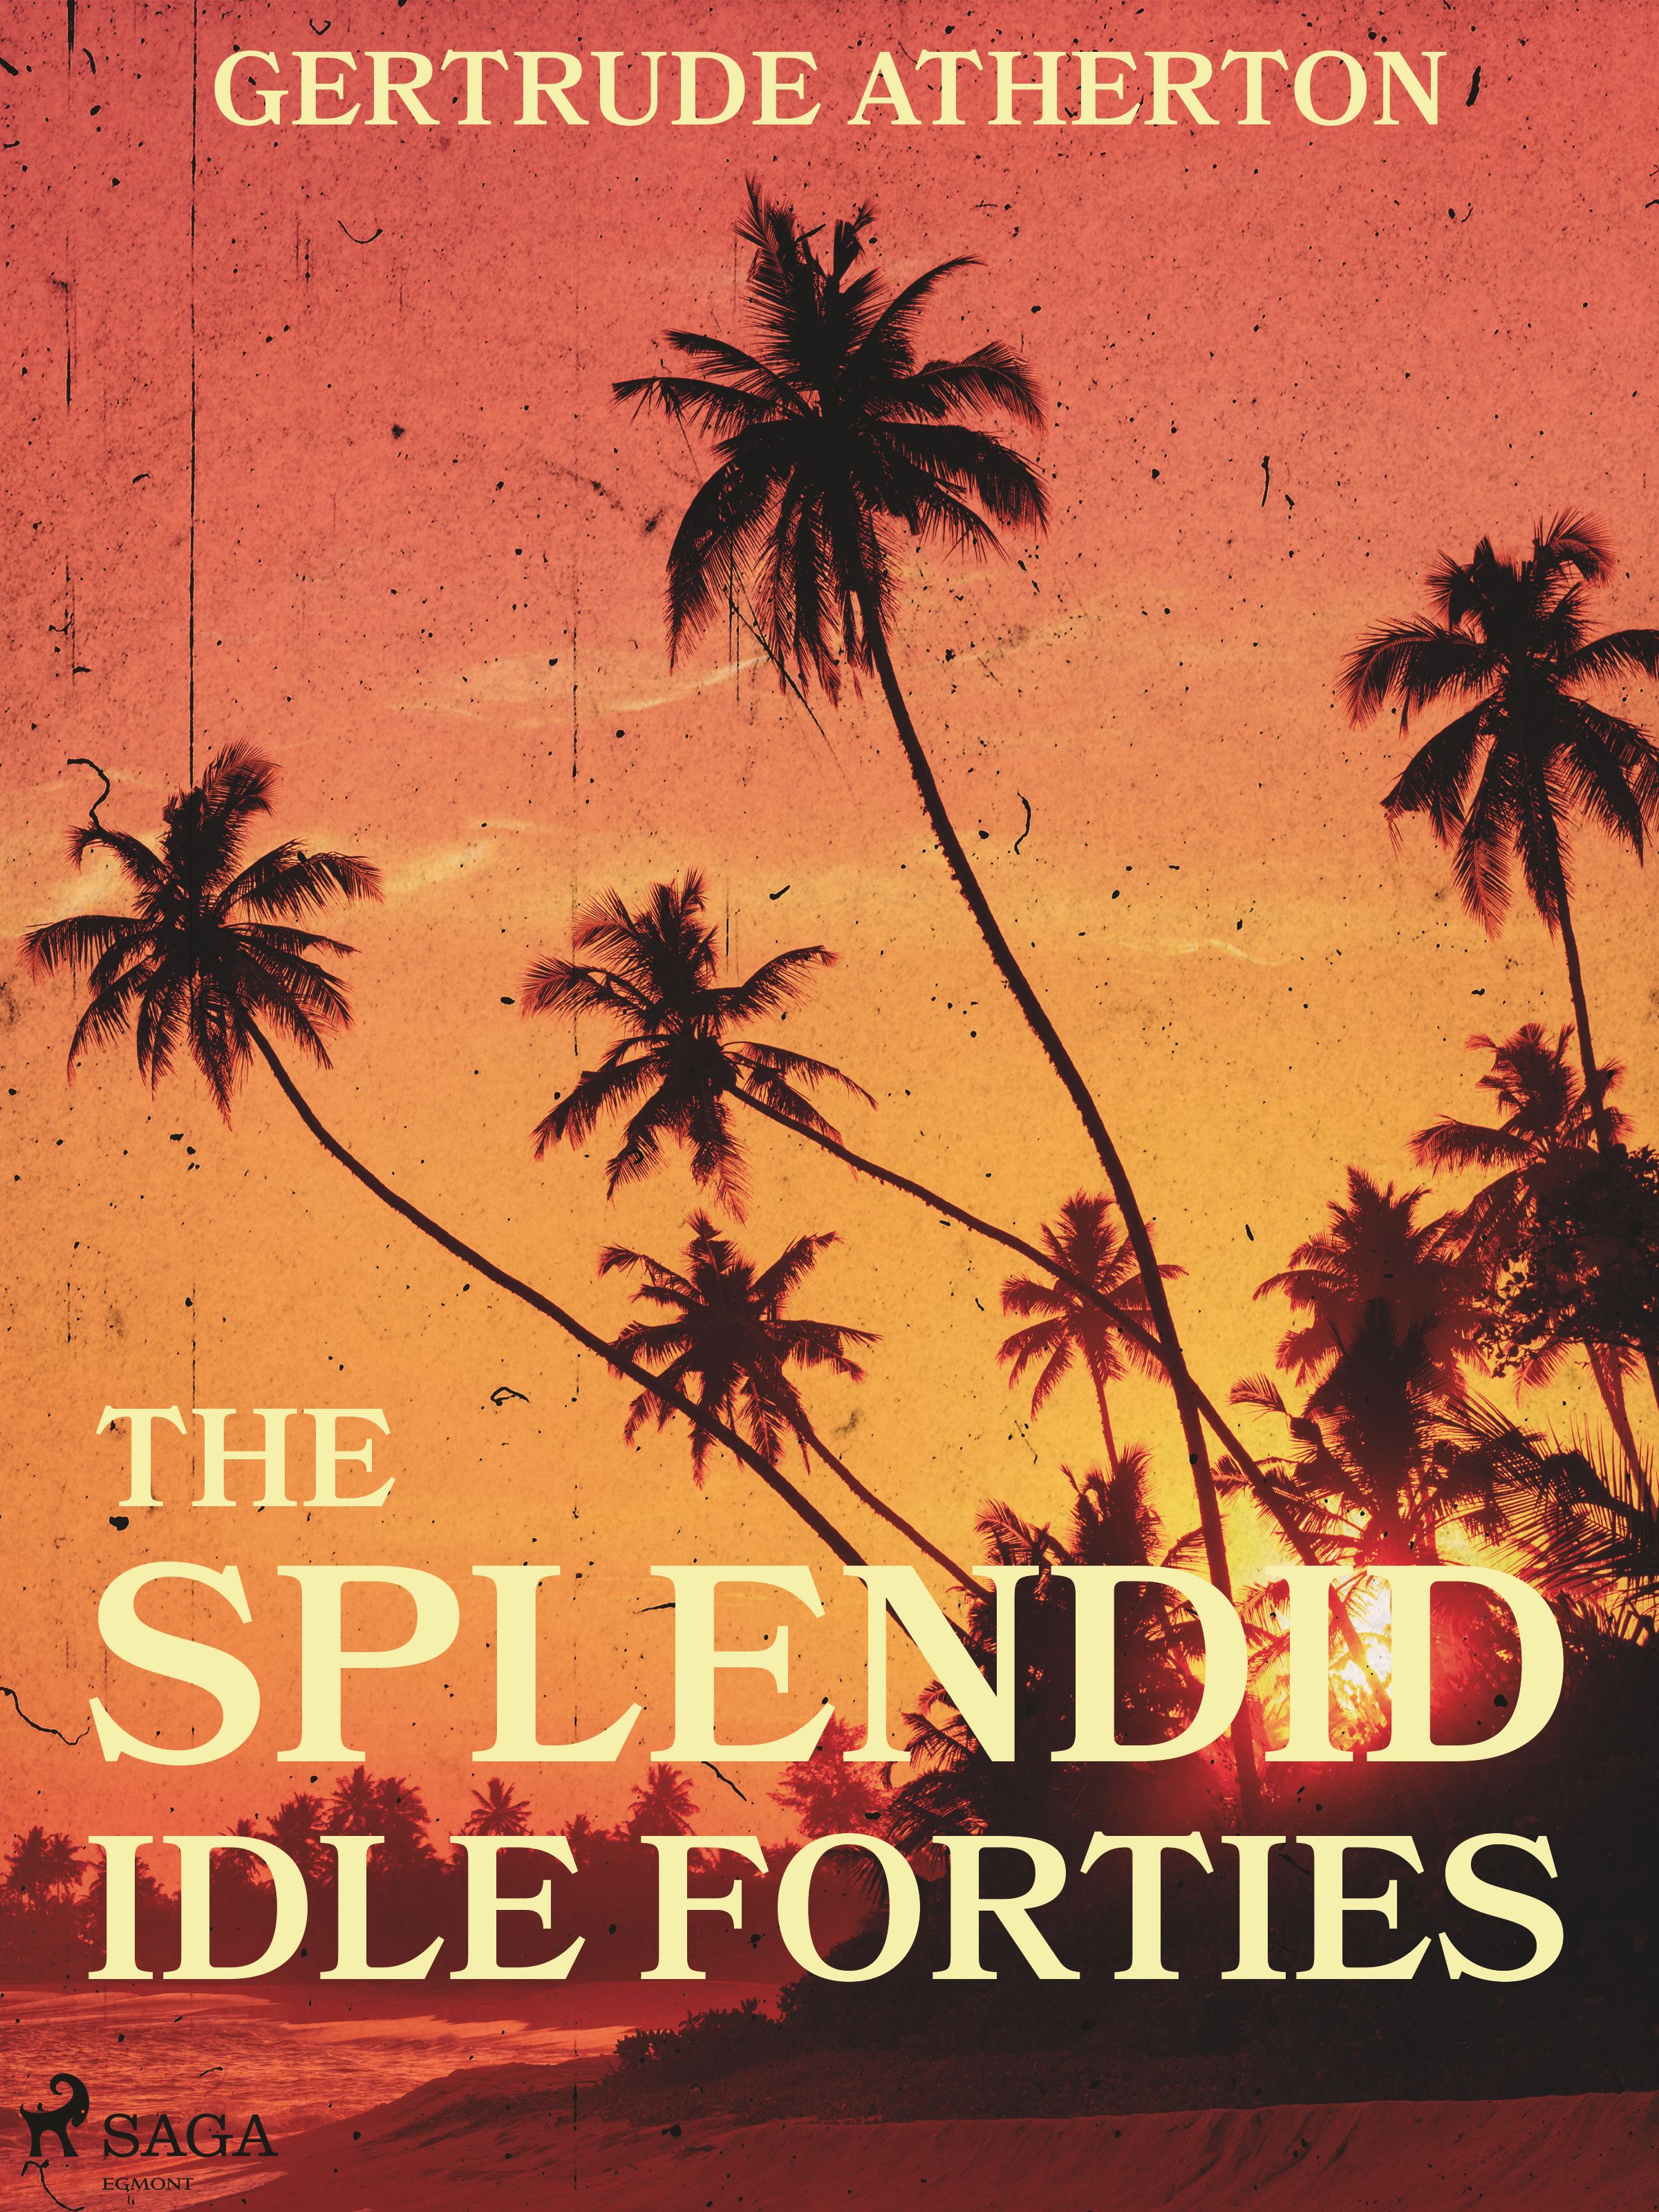 The Splendid, Idle Forties, eBook by Gertrude Atherton